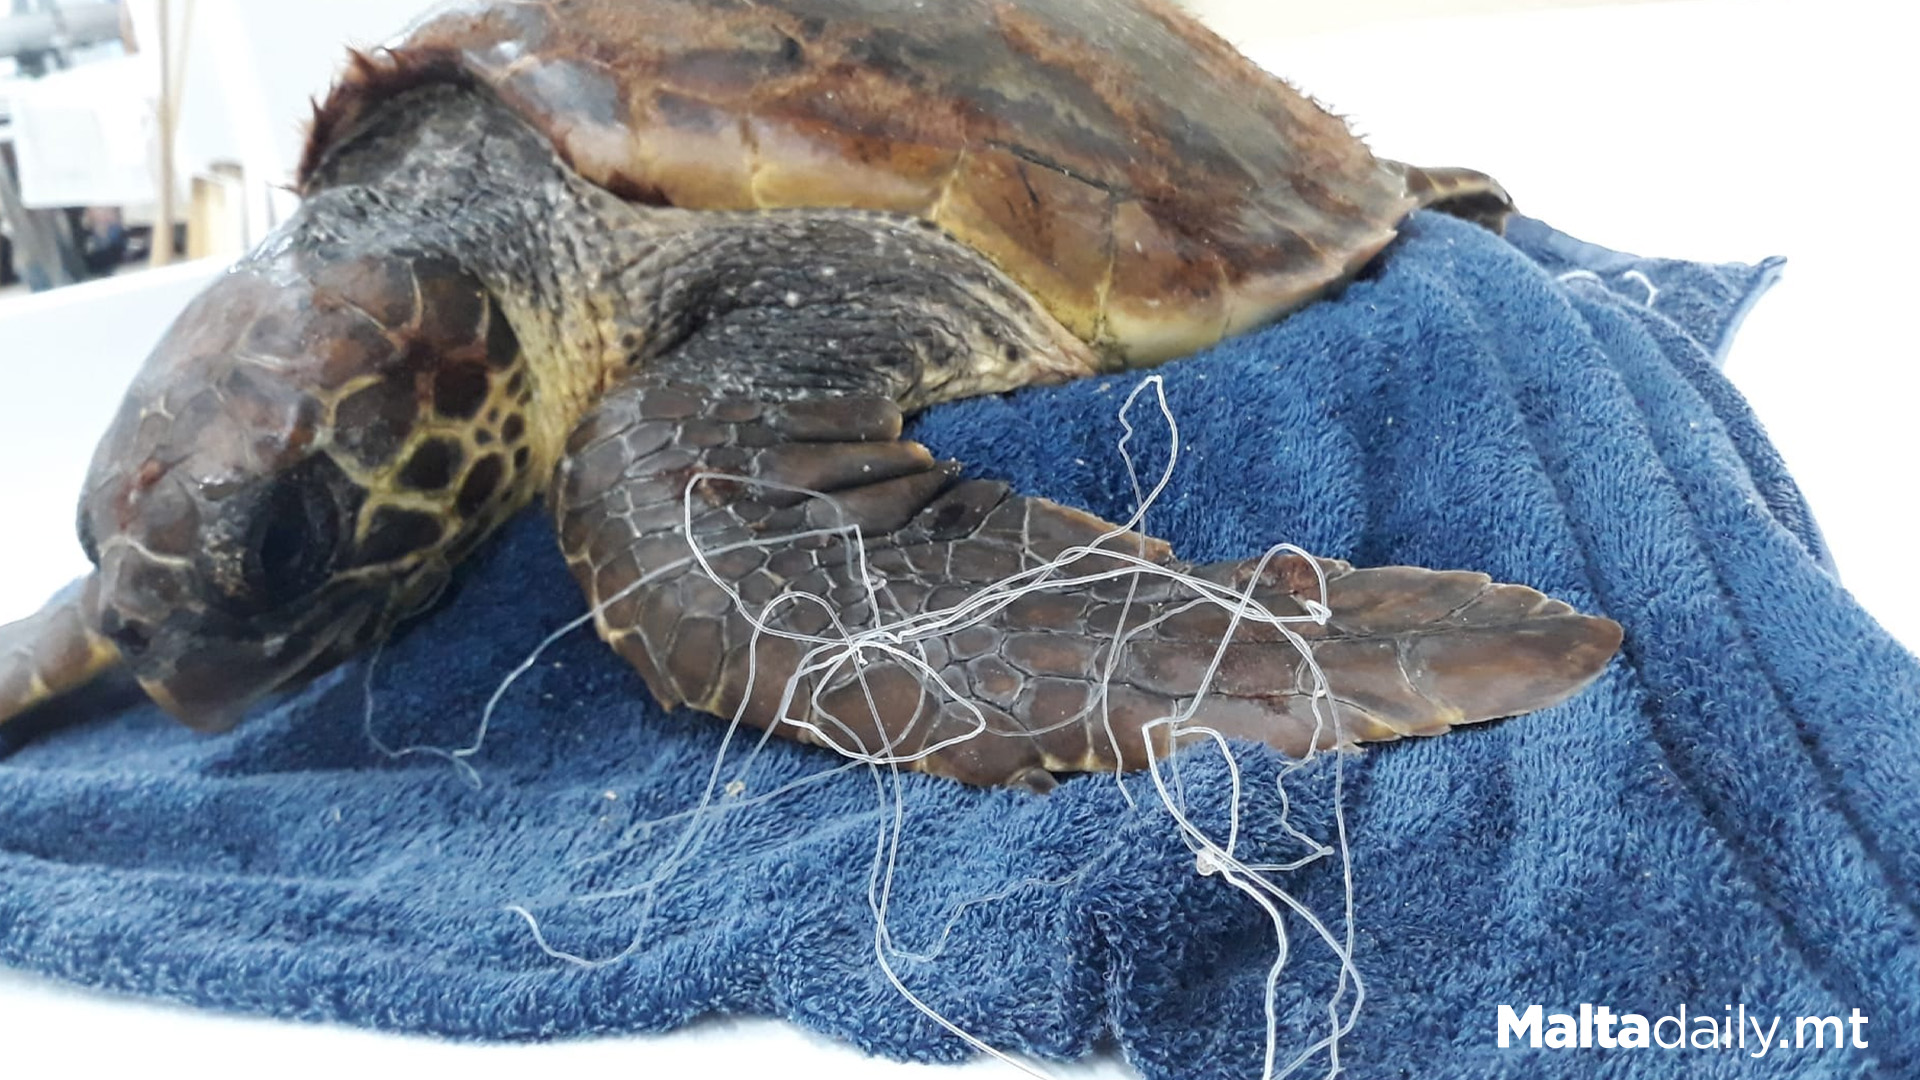 More Injured Turtles Entangled In Fishing Lines Rescued